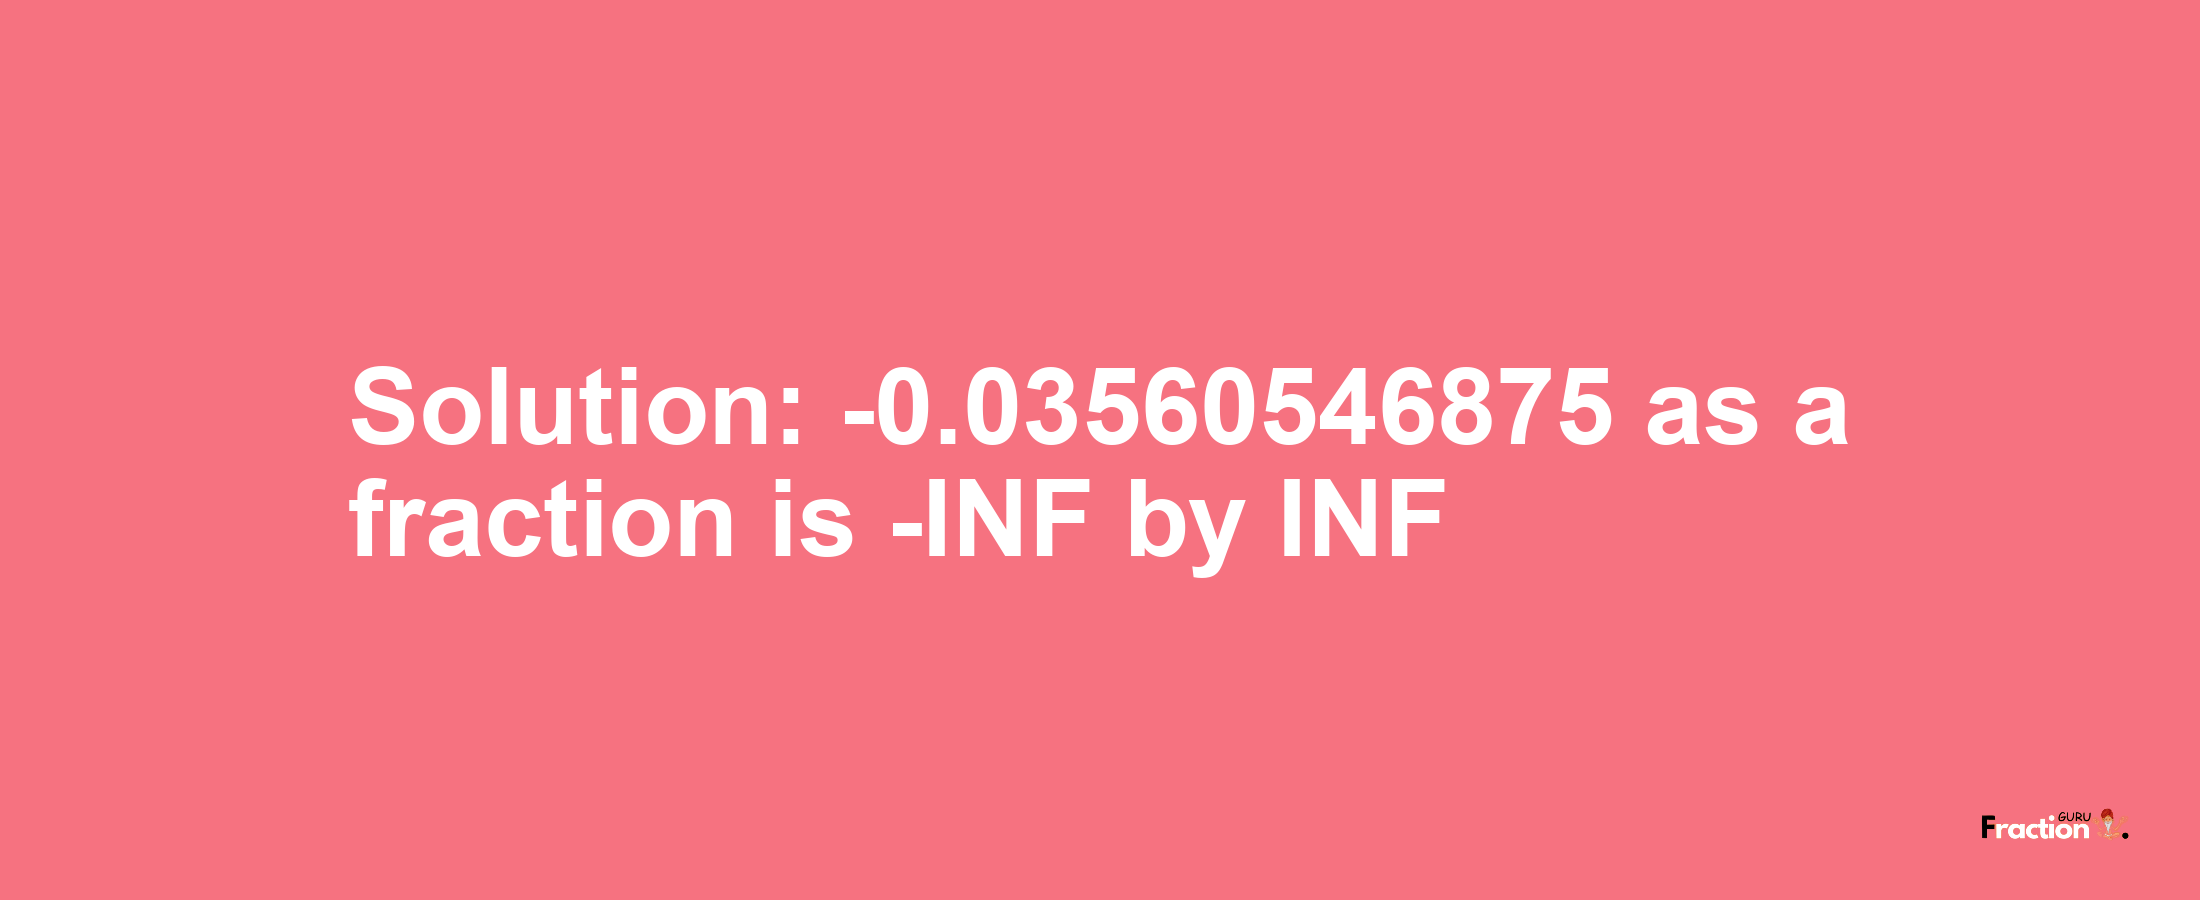 Solution:-0.03560546875 as a fraction is -INF/INF